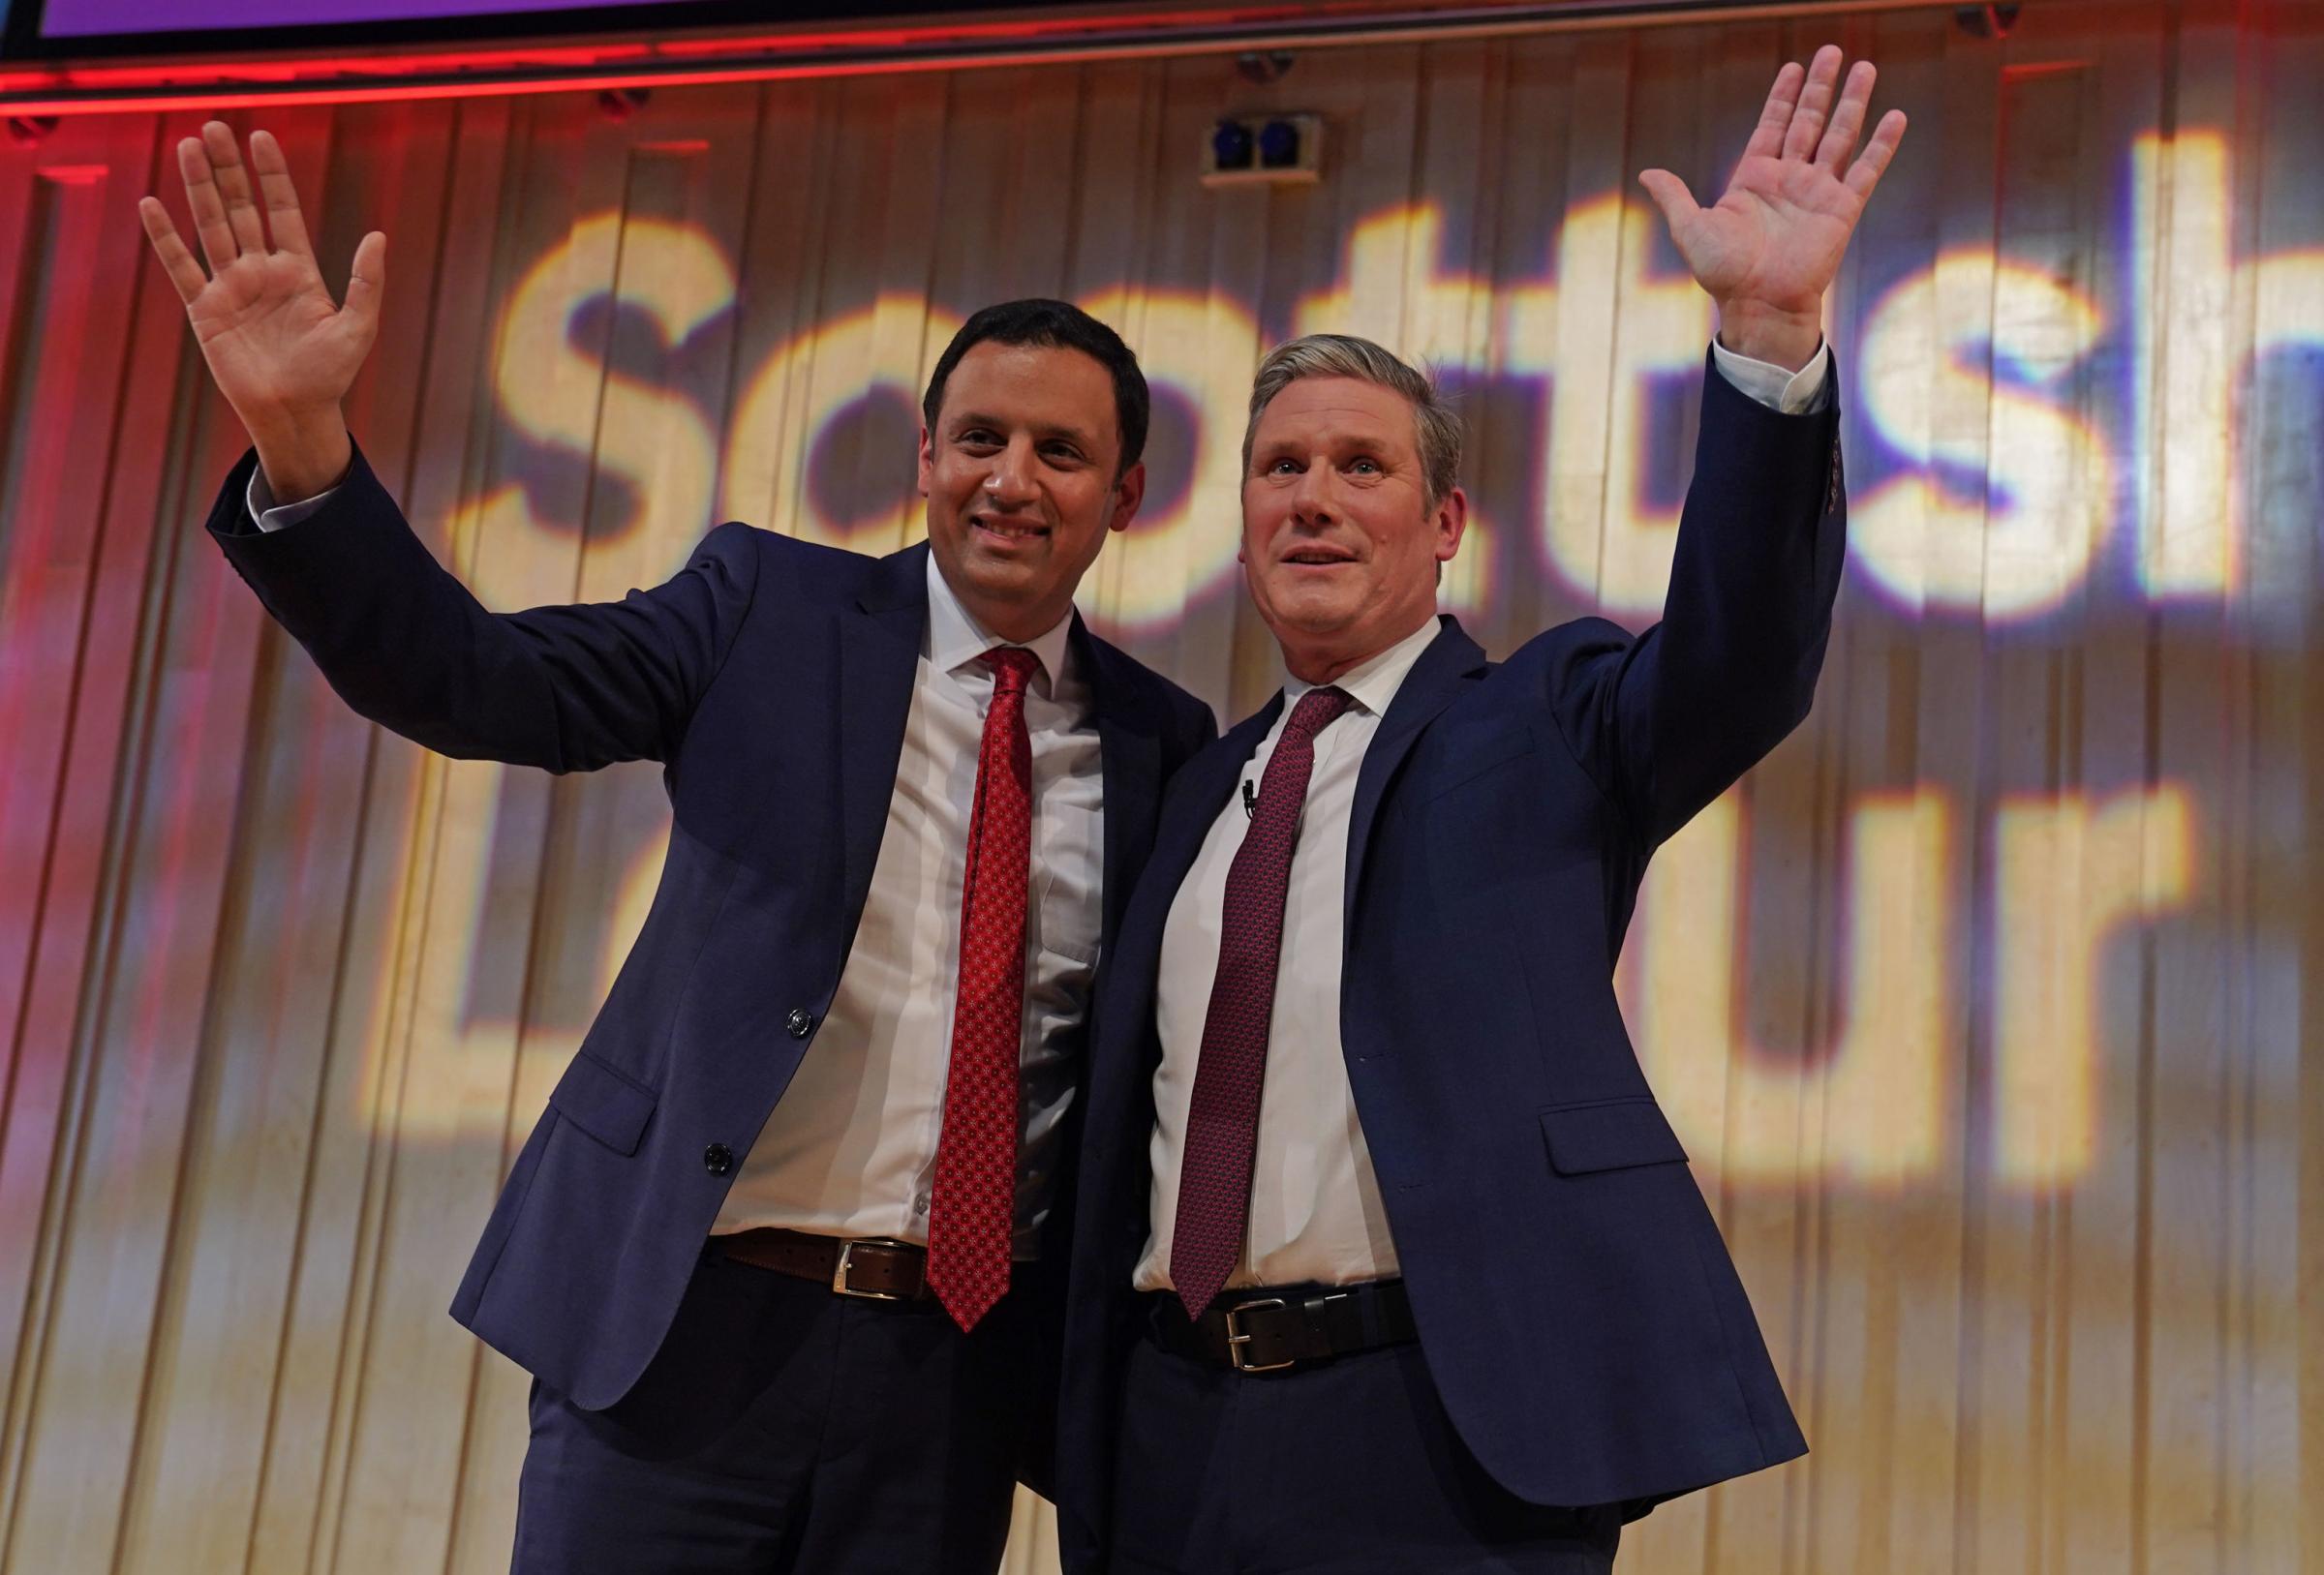 Six ridiculous things Labour have done this week that they hope you won't notice